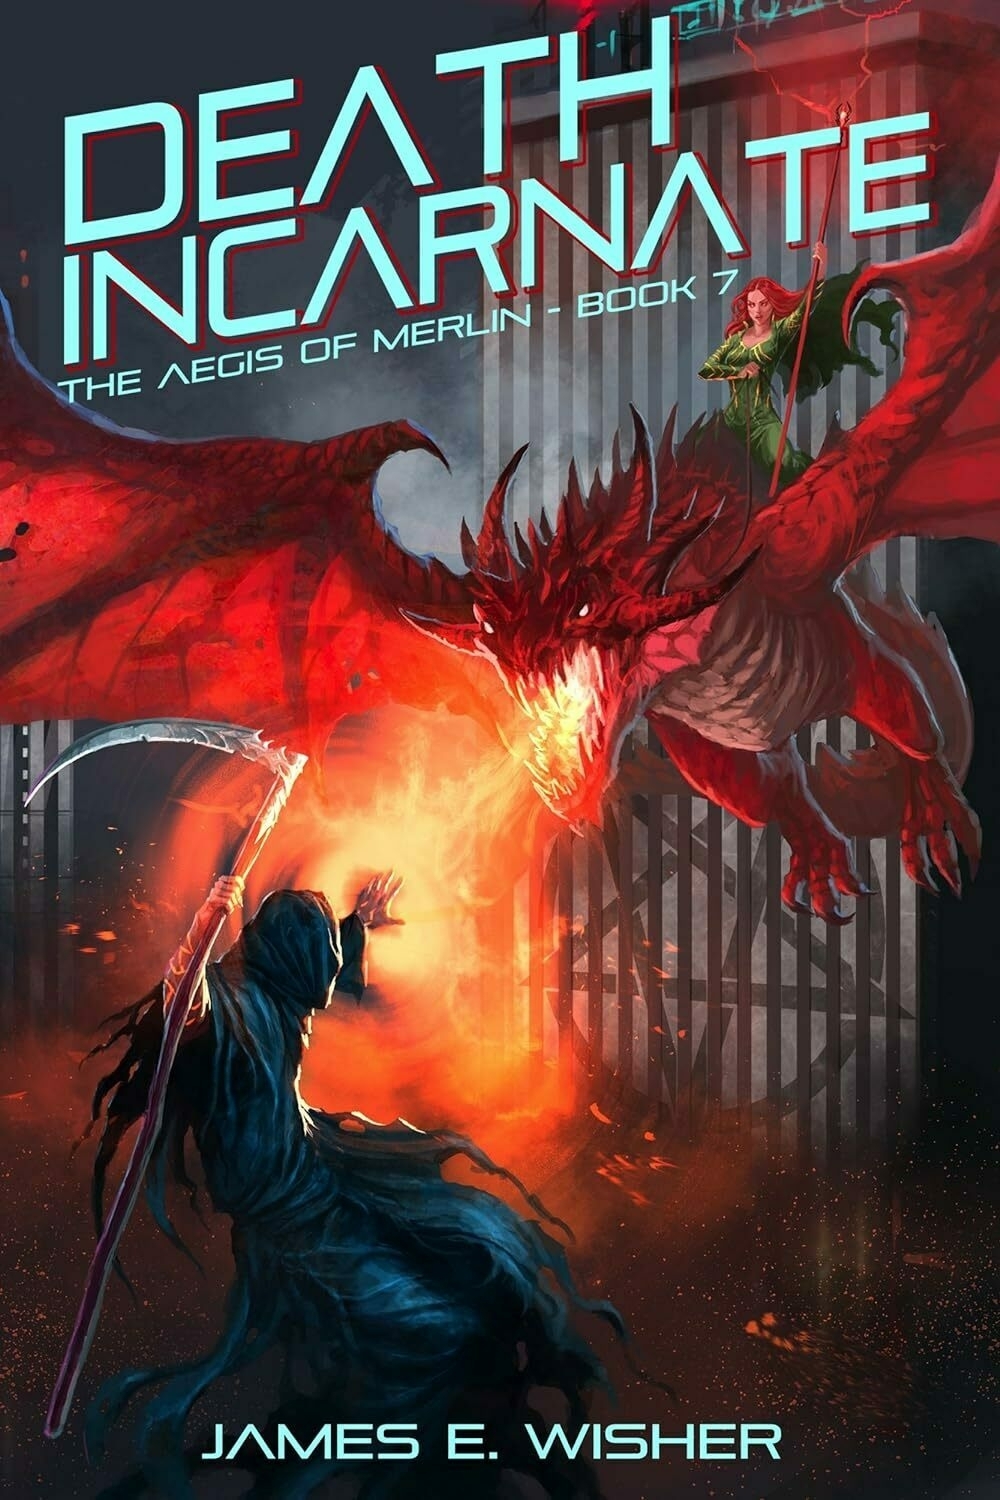 A robed figure wields a scythe facing a fire-breathing dragon amidst a fiery urban backdrop. Text: 'DEATH INCARNATE, THE AEGIS OF MERLIN - BOOK 7, JAMES E. WISHER'